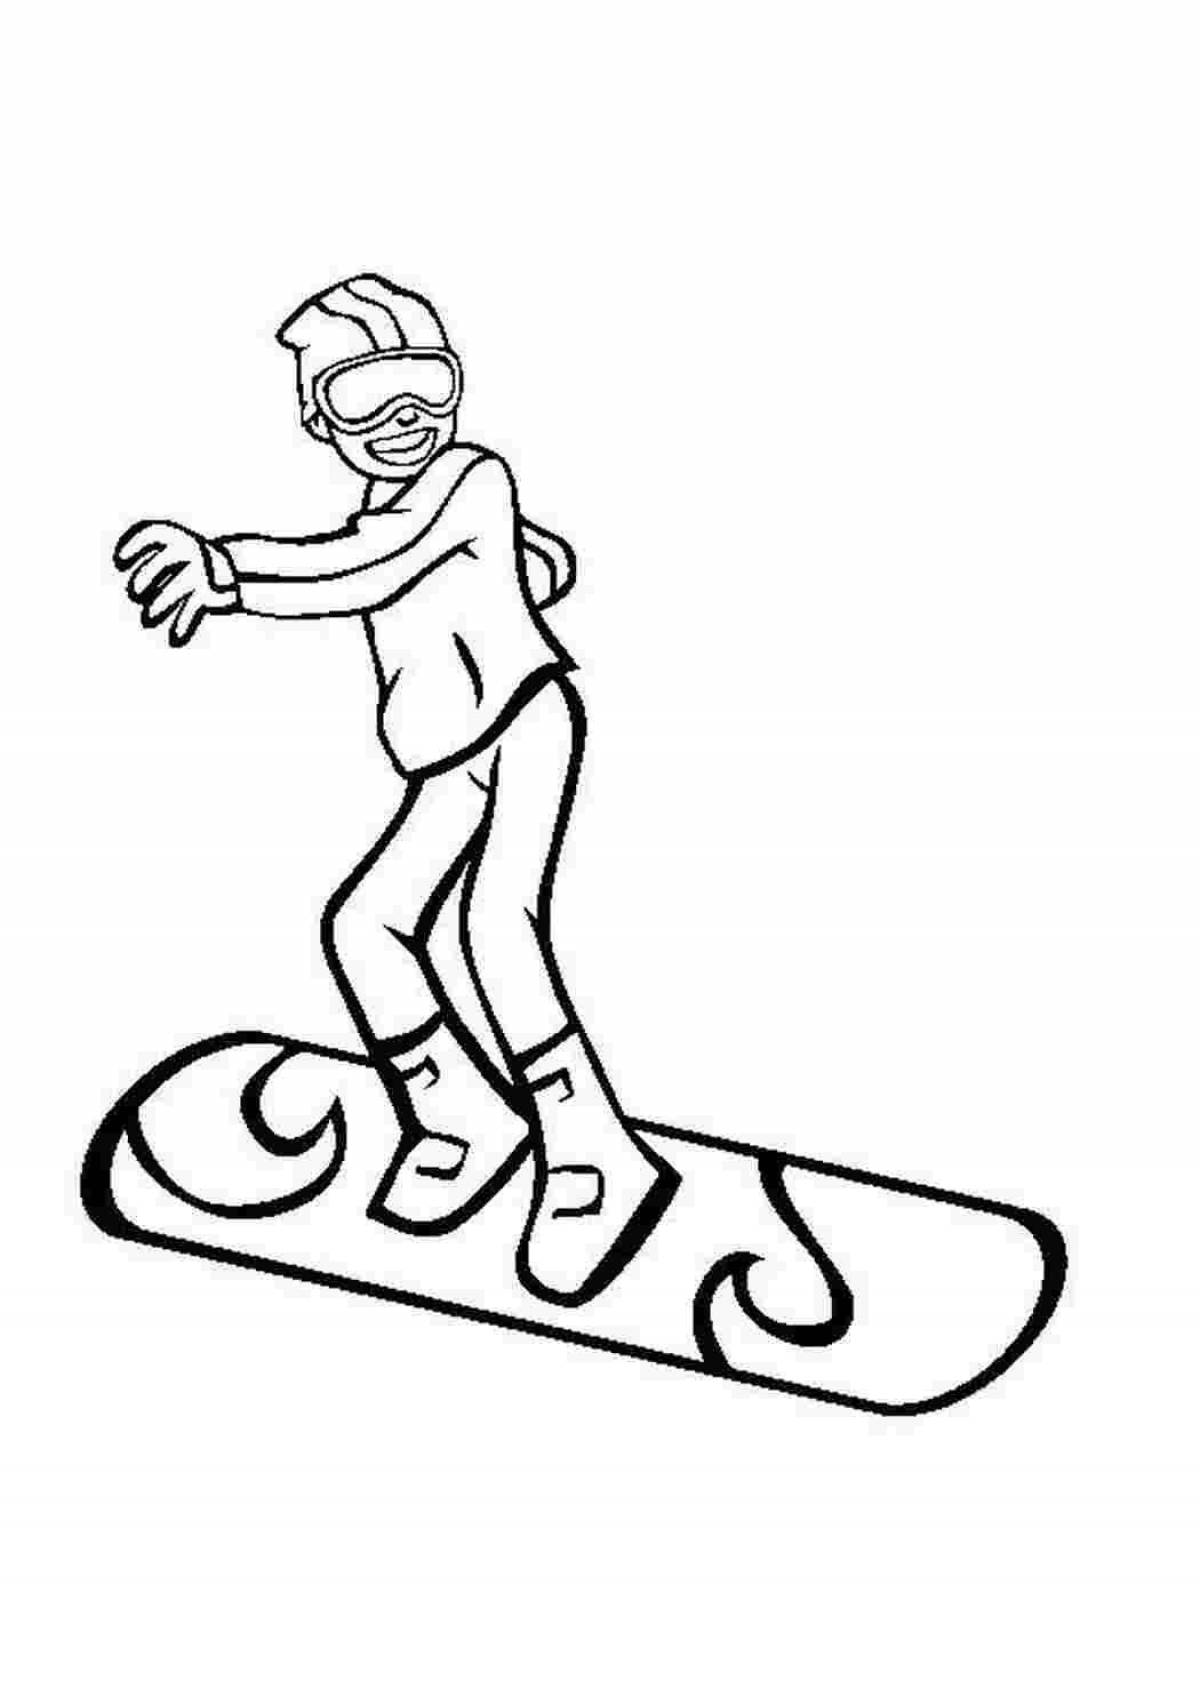 Outstanding snowboarder coloring book for kids